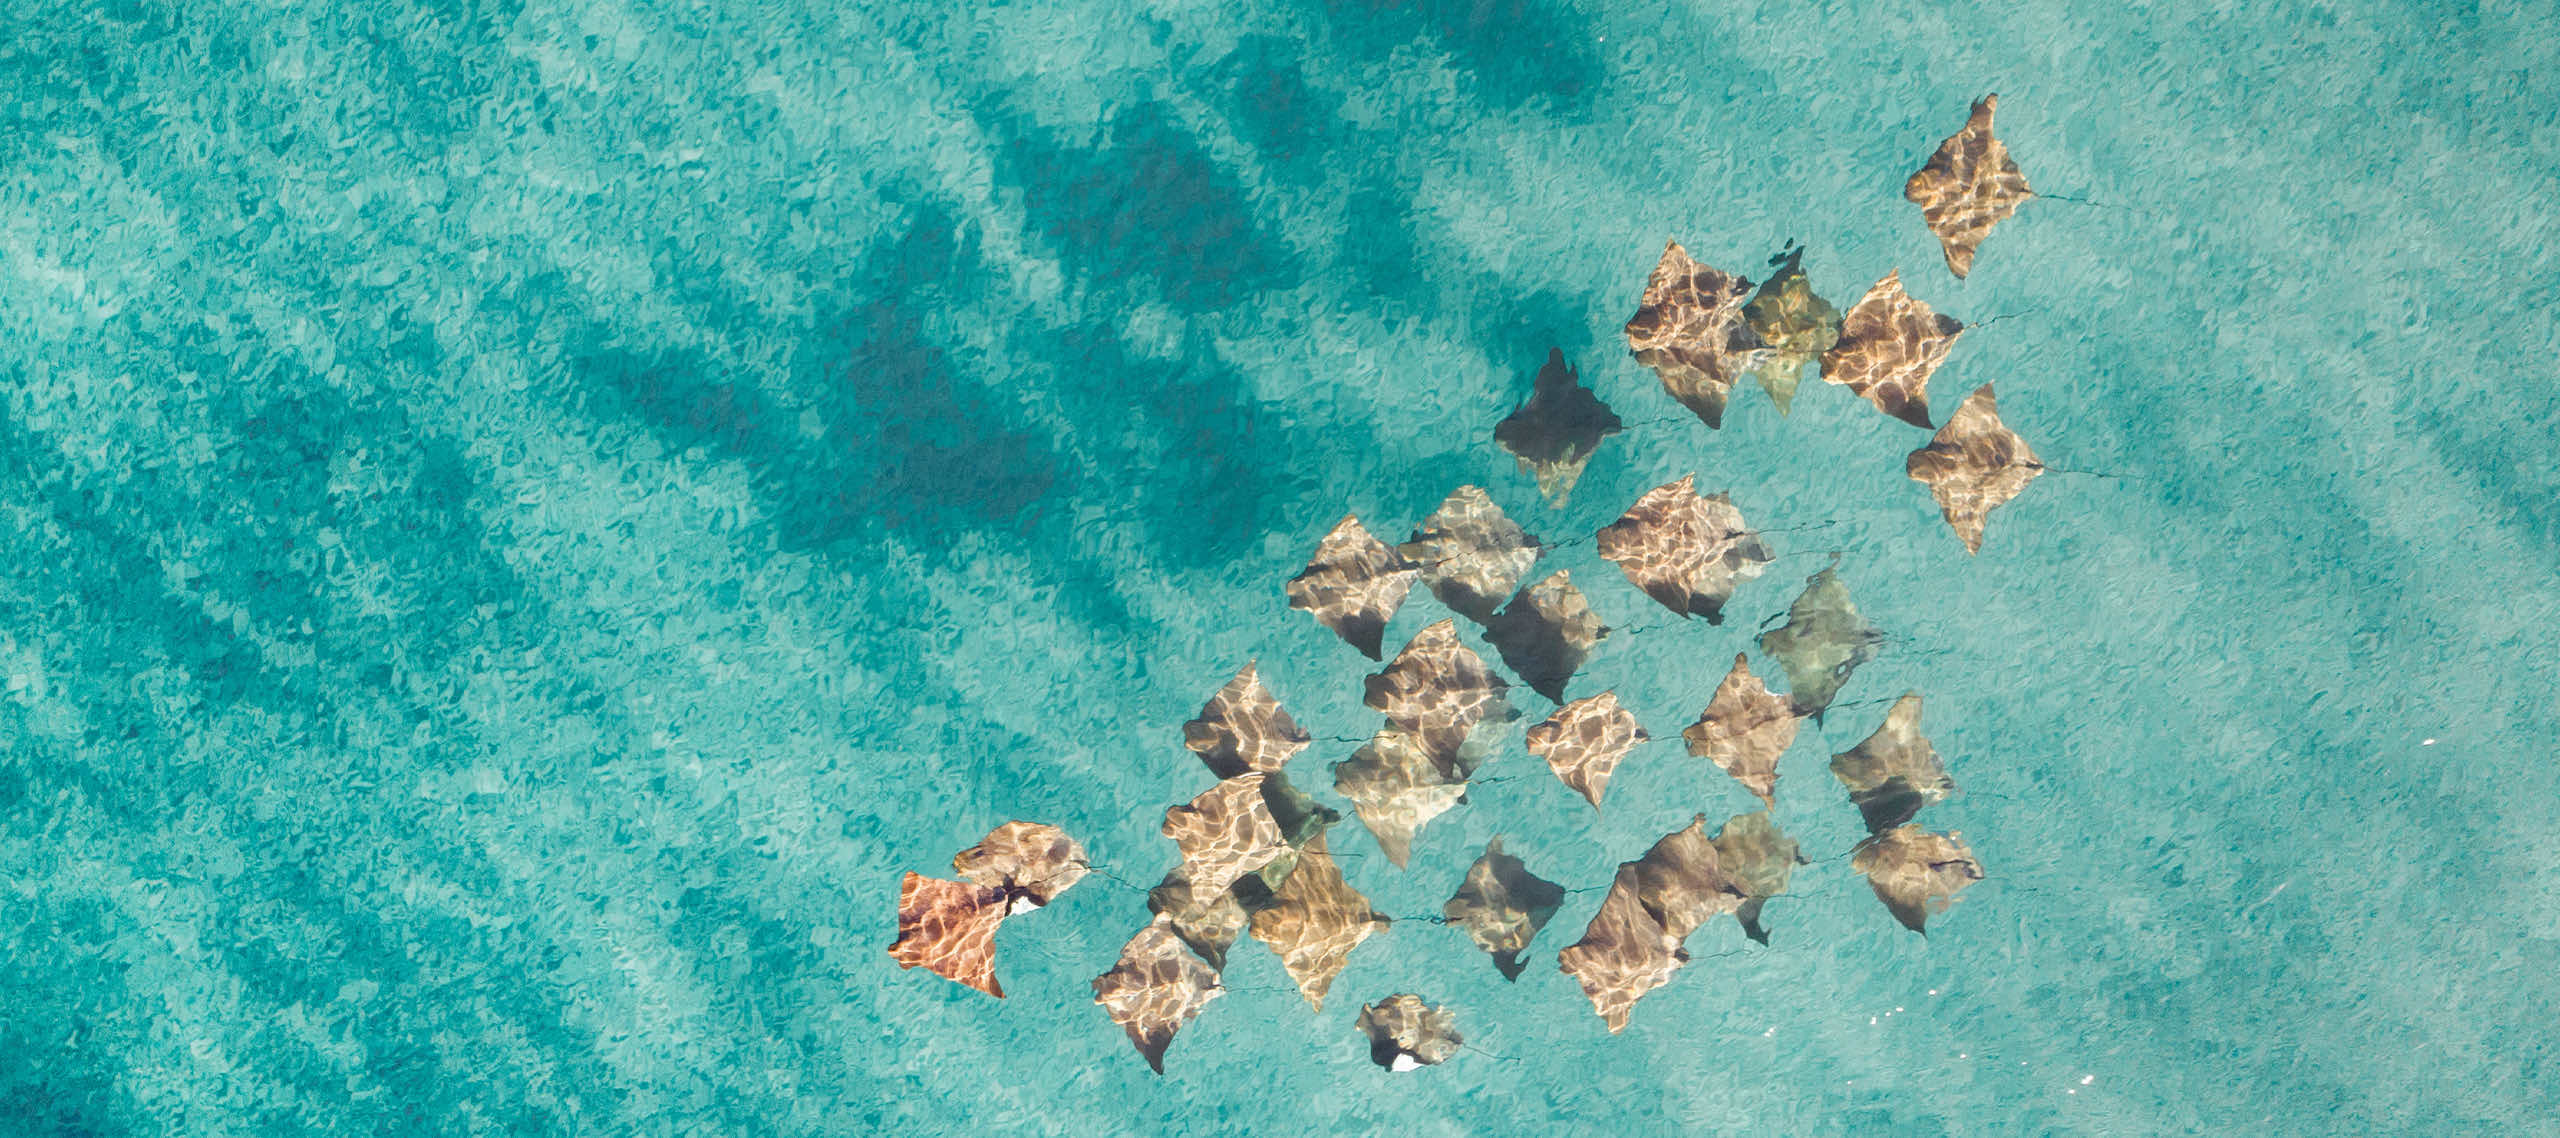 Aerial view of a pod of sting rays in blue pristine water